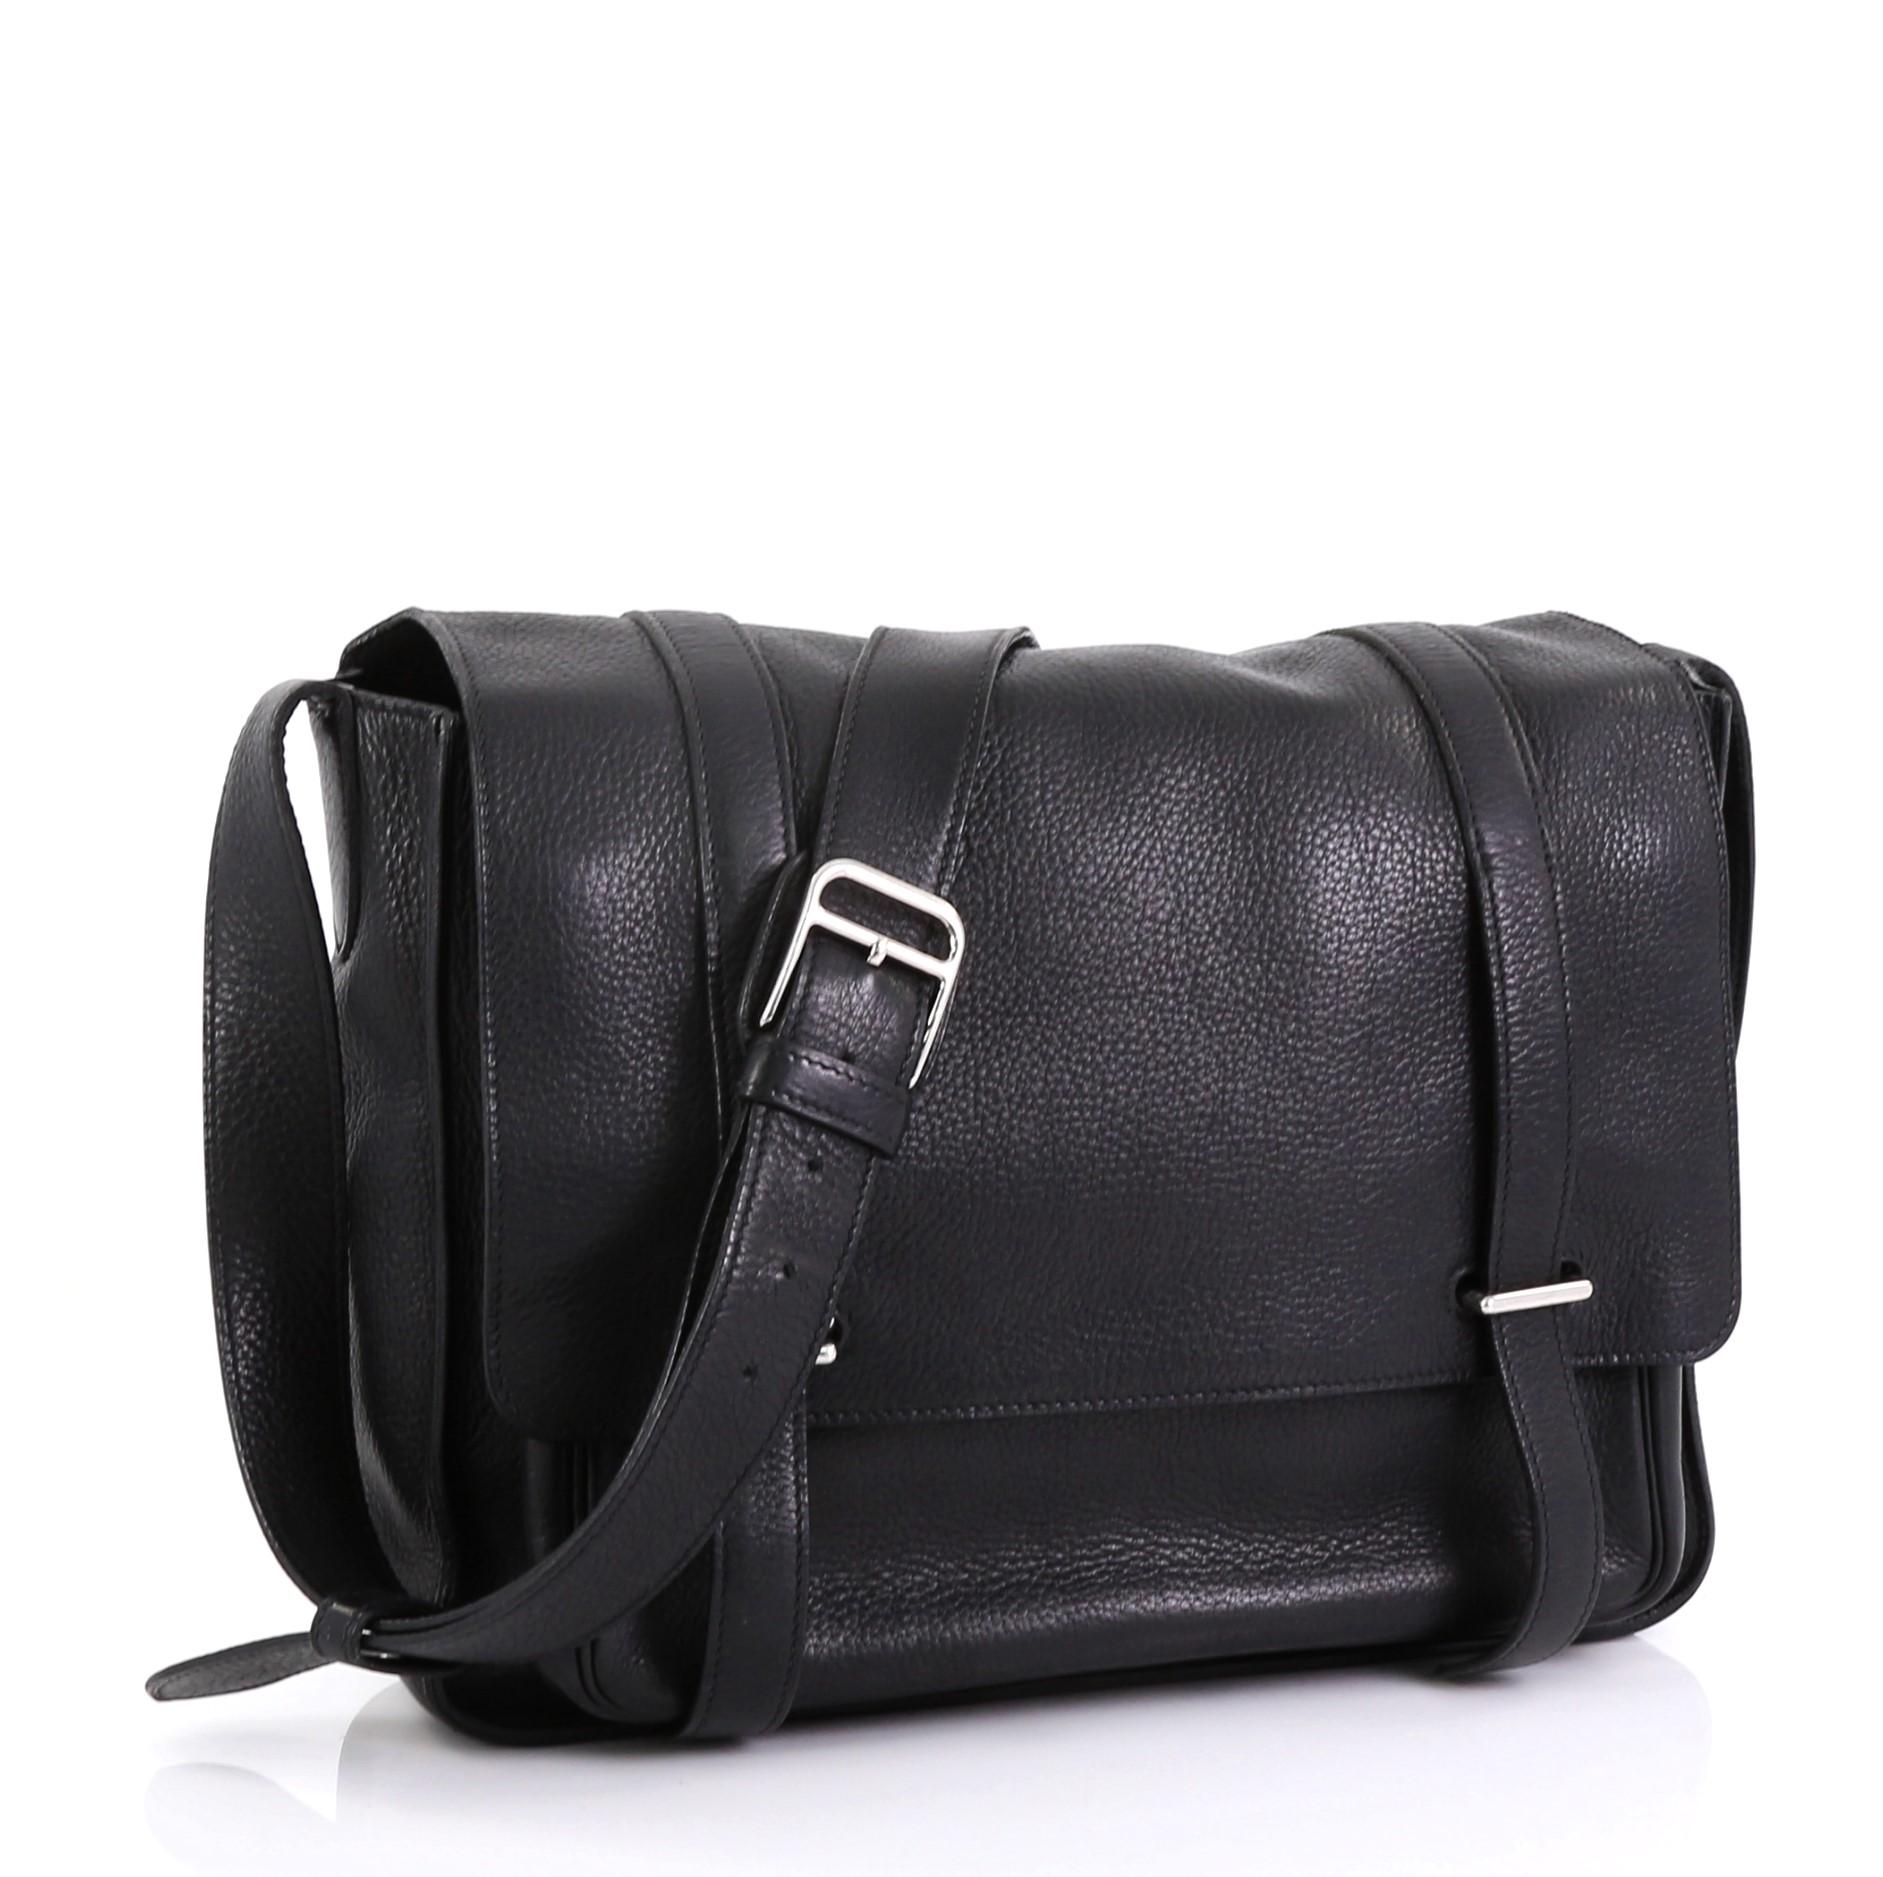 This Hermes Steve Messenger Bag Clemence 35, crafted in Noir black Clemence leather, features a frontal flap pocket with double tab and bracket closure, adjustable leather strap, and palladium hardware. Its bracket closure opens to a Noir black